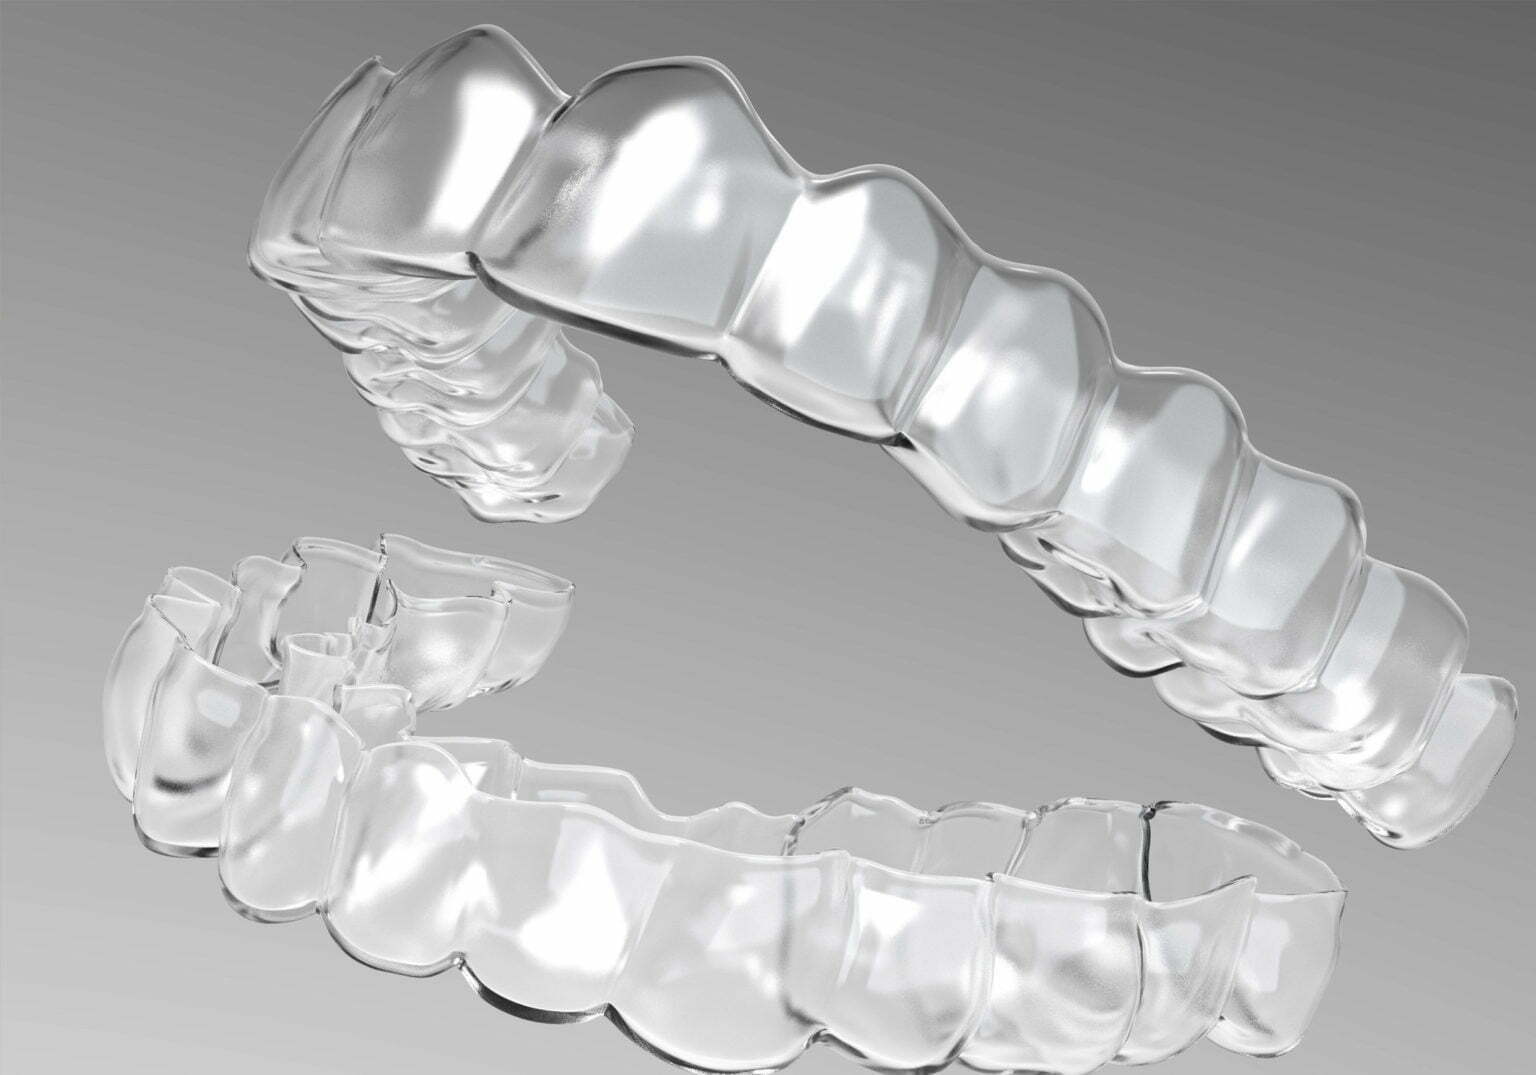 Orthodontic Clear Aligners | Invisaligner | Invisible Ortho Aligners